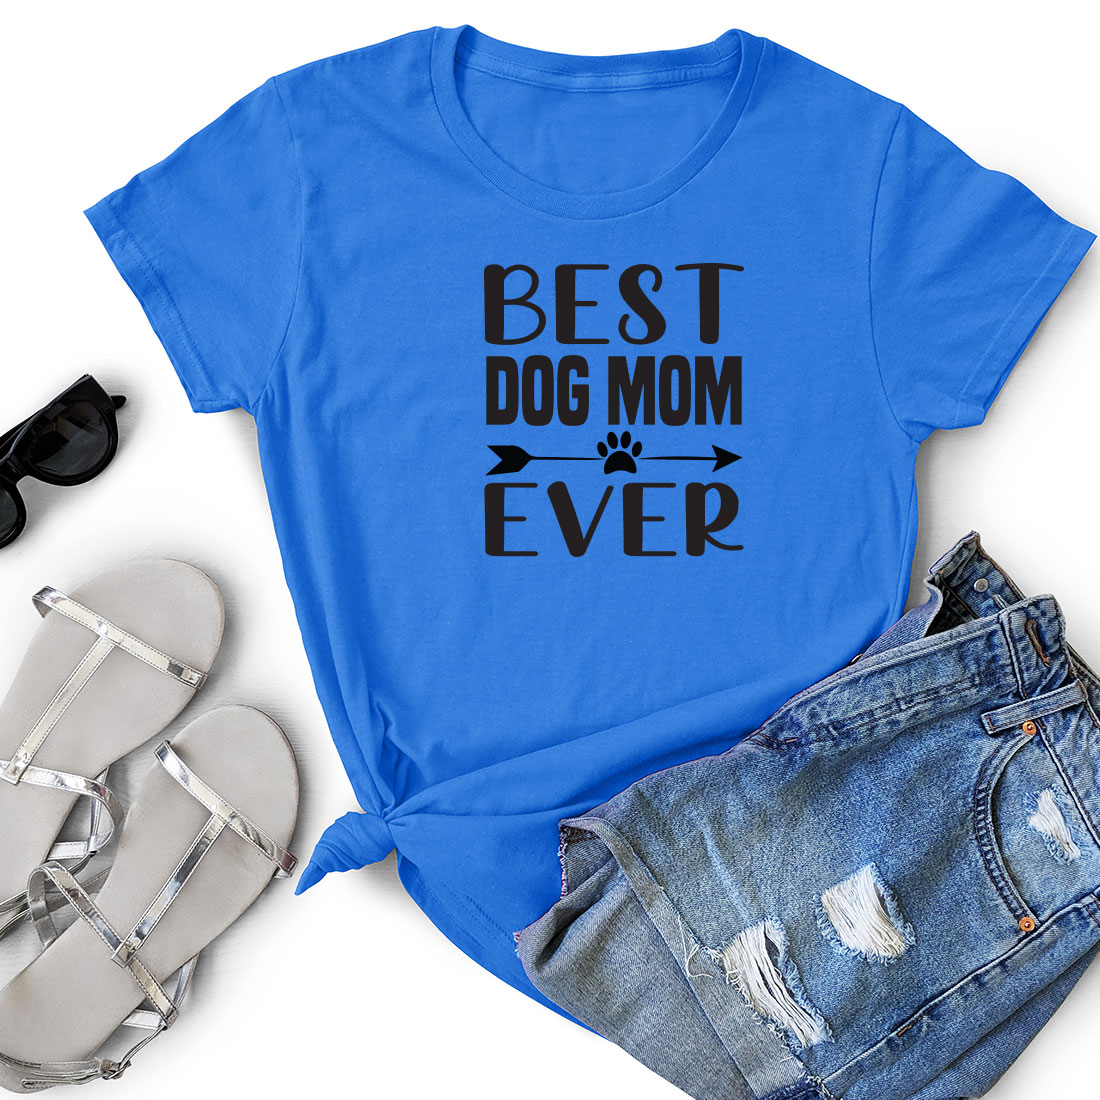 T - shirt that says best dog mom ever next to a pair of shorts.